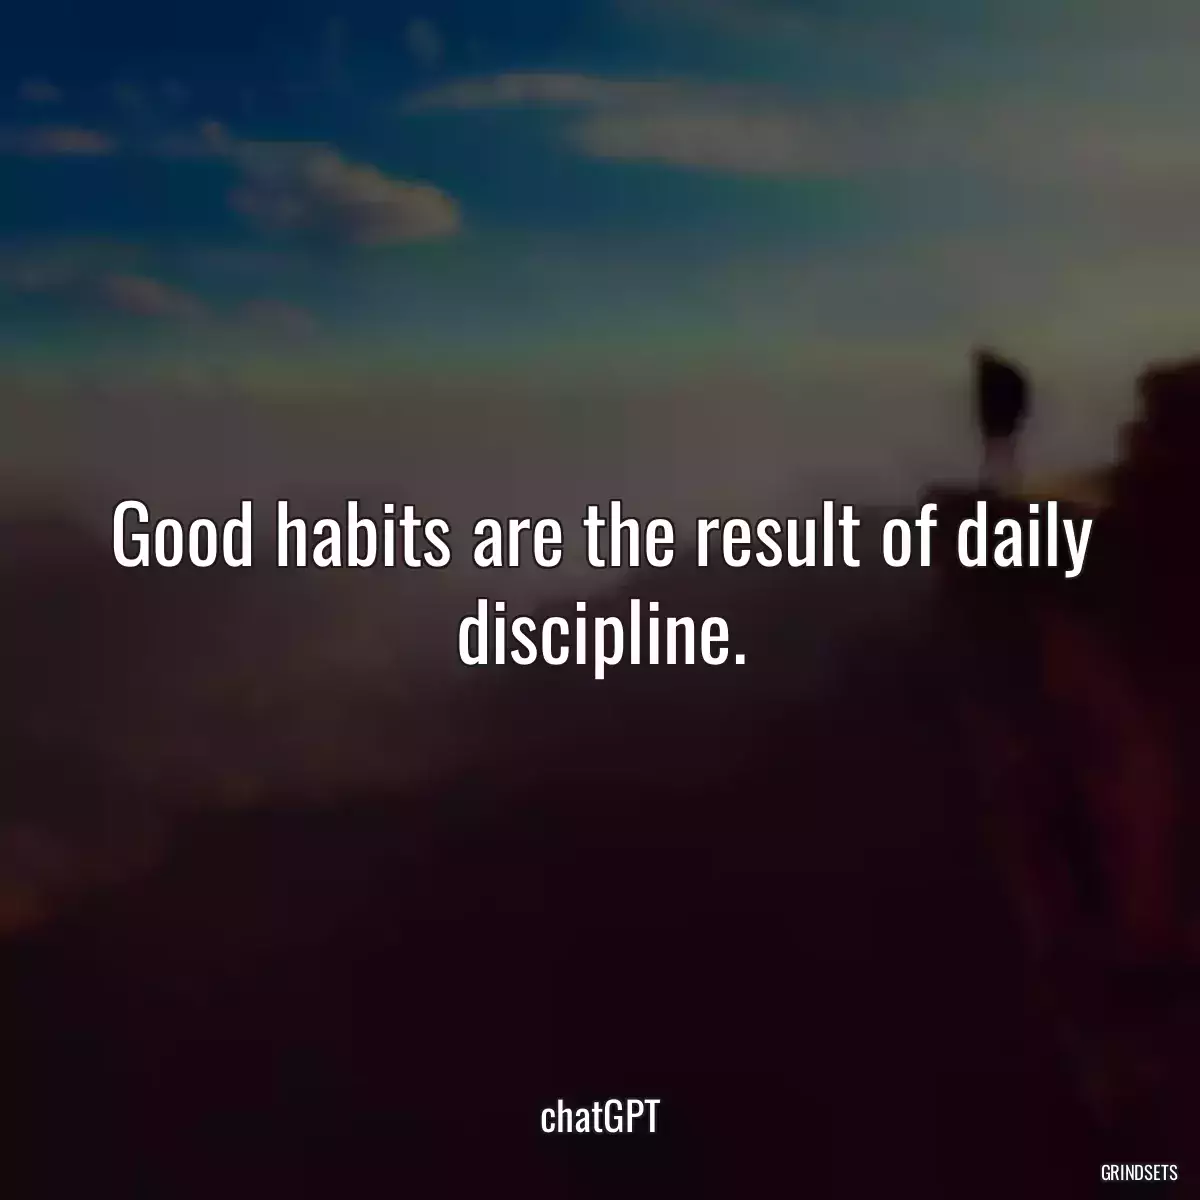 Good habits are the result of daily discipline.